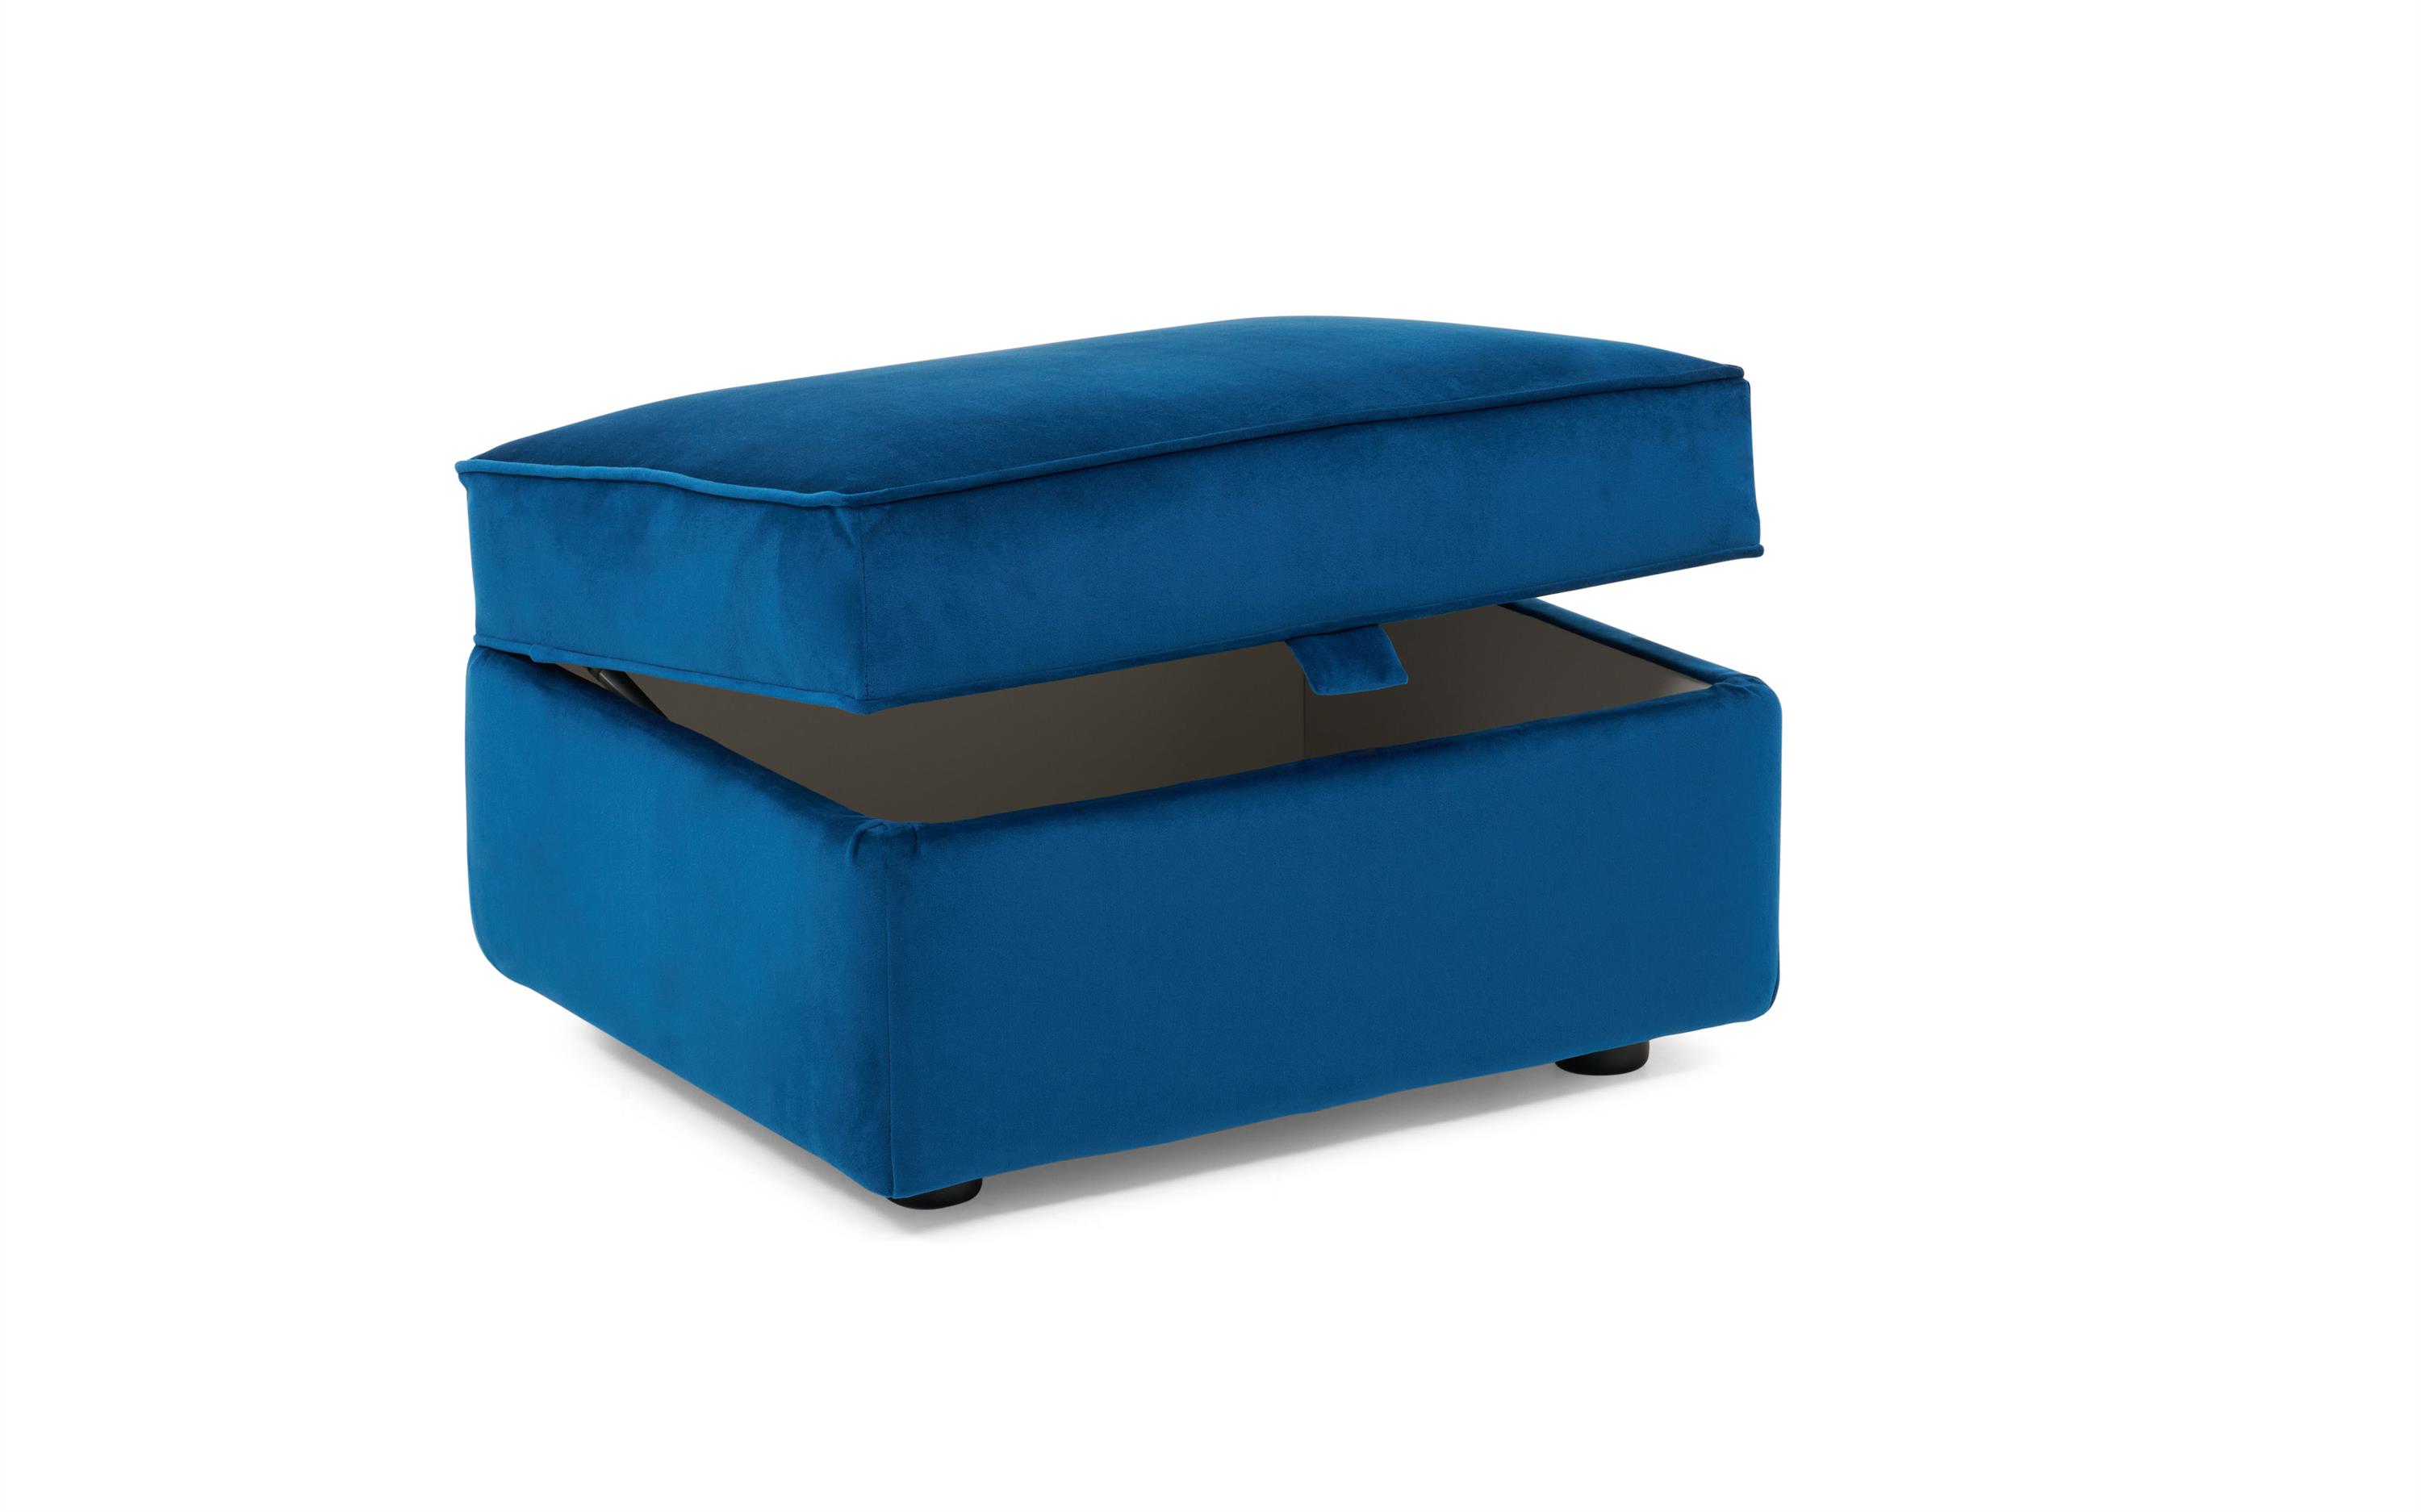 NEW Little Under Desk Low 9-10 Cm 4 Footstool With Plastic Feet